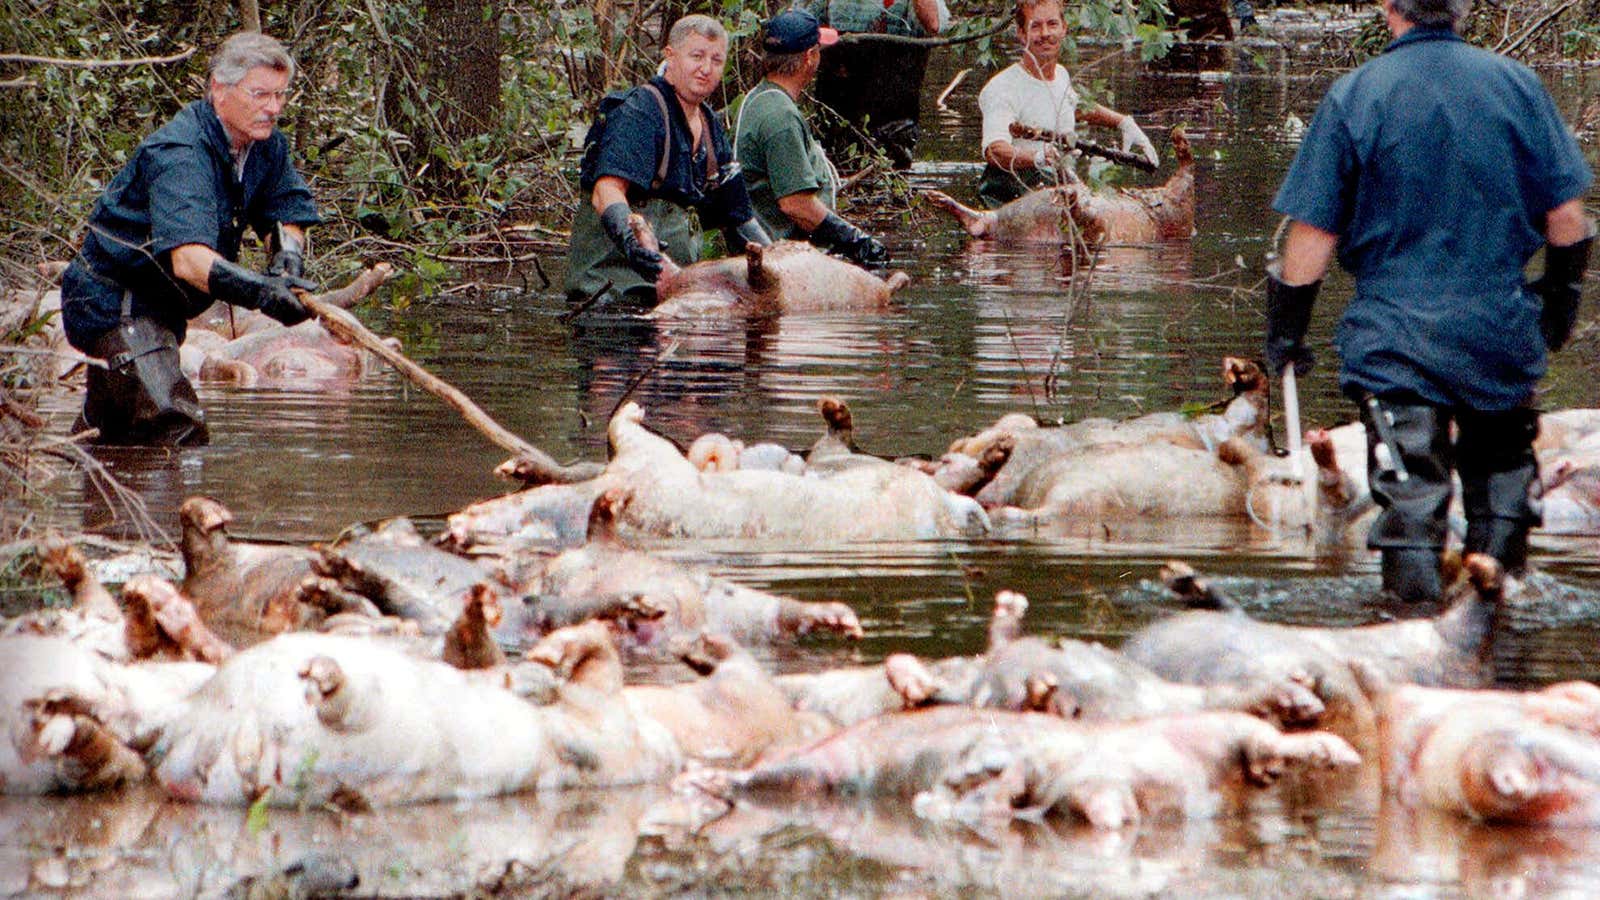 About 21,000 hogs drowned in 1999 in Hurricane Floyd’s floodwaters. In this 1999 image, drowned hogs are retrieved from a flooded North Carolina road.